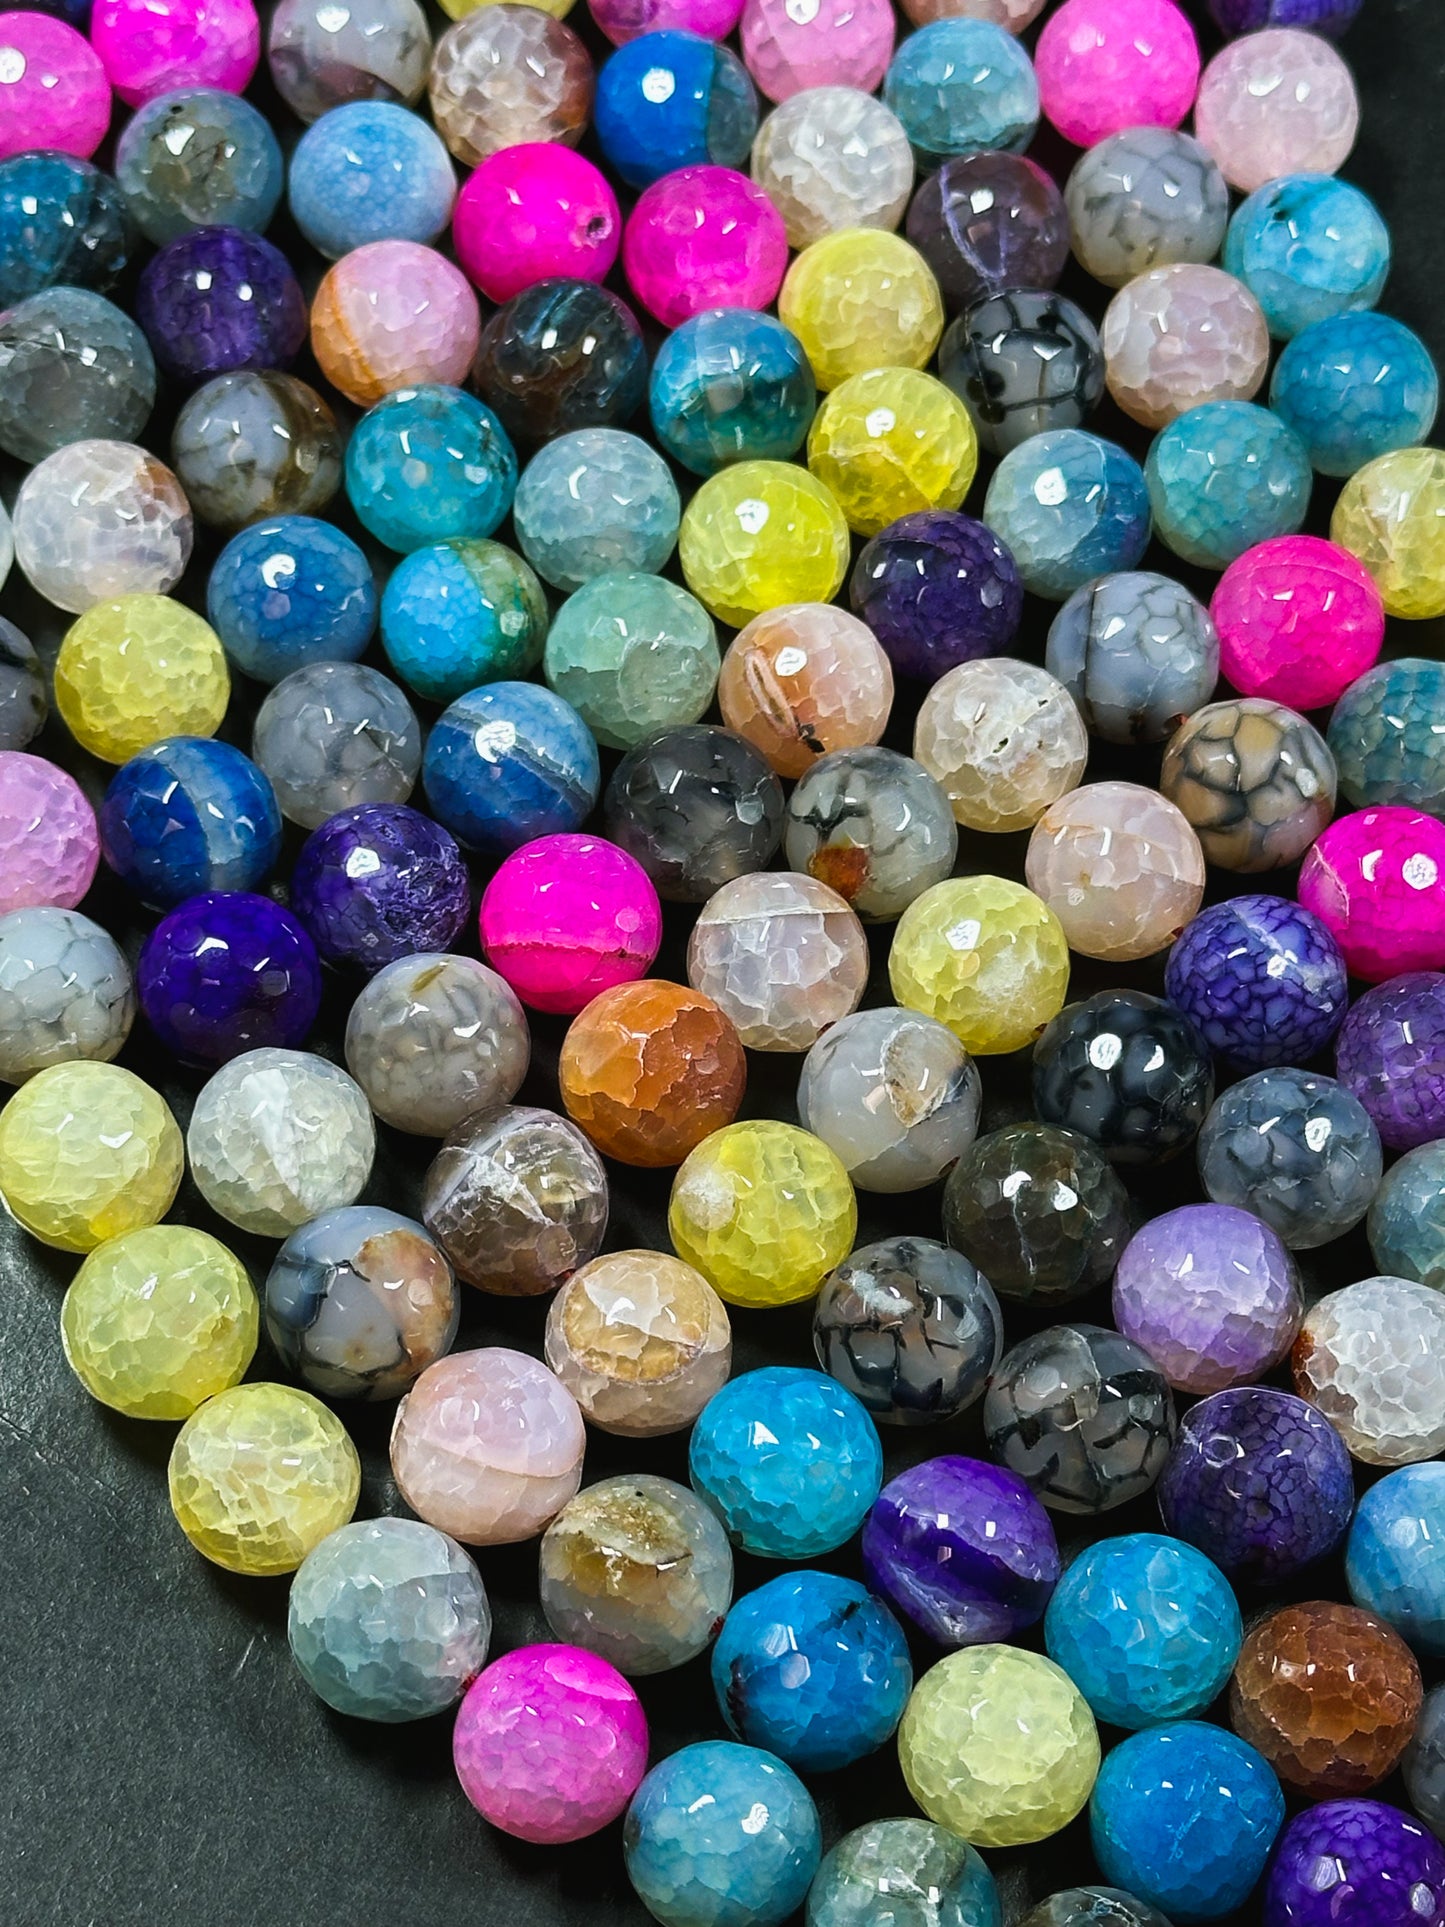 Natural Dragon Vein Agate Gemstone Bead Faceted 14mm Round Bead, Gorgeous Multicolor Dragon Vein Agate Bead, Great Quality Full Strand 15.5"